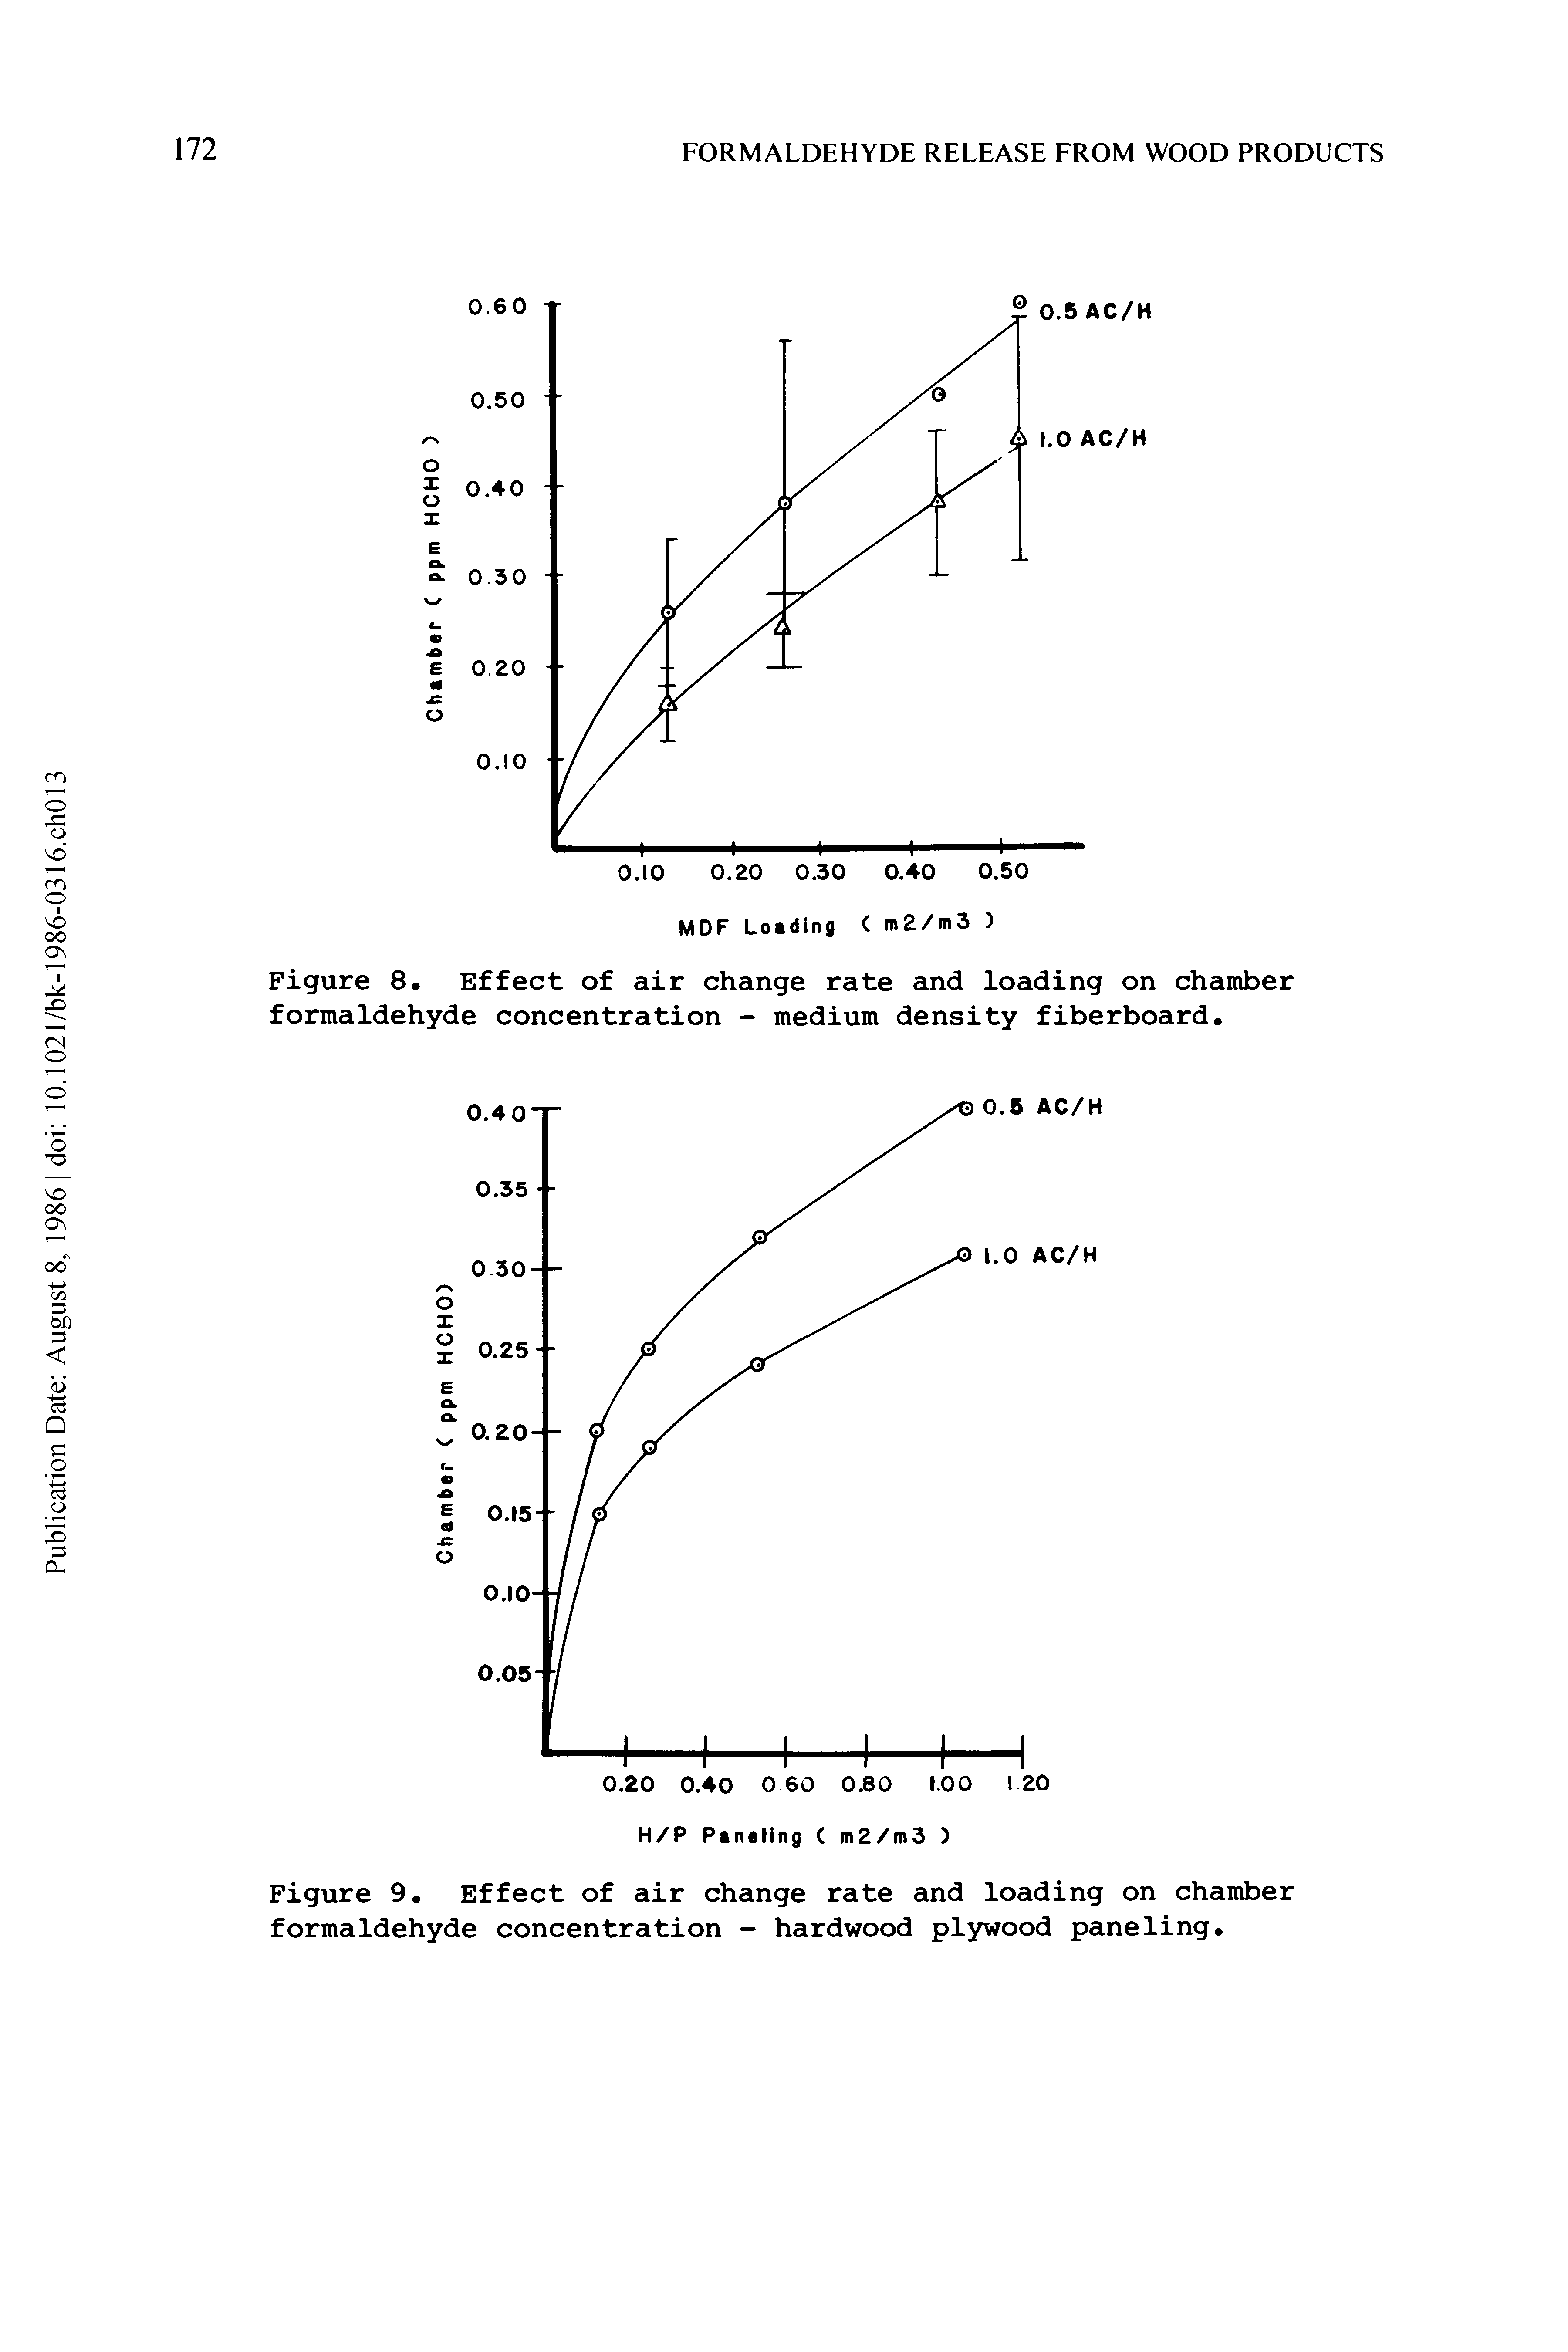 Figure 8. Effect of air change rate and loading on chamber formaldehyde concentration - medium density fiberboard.